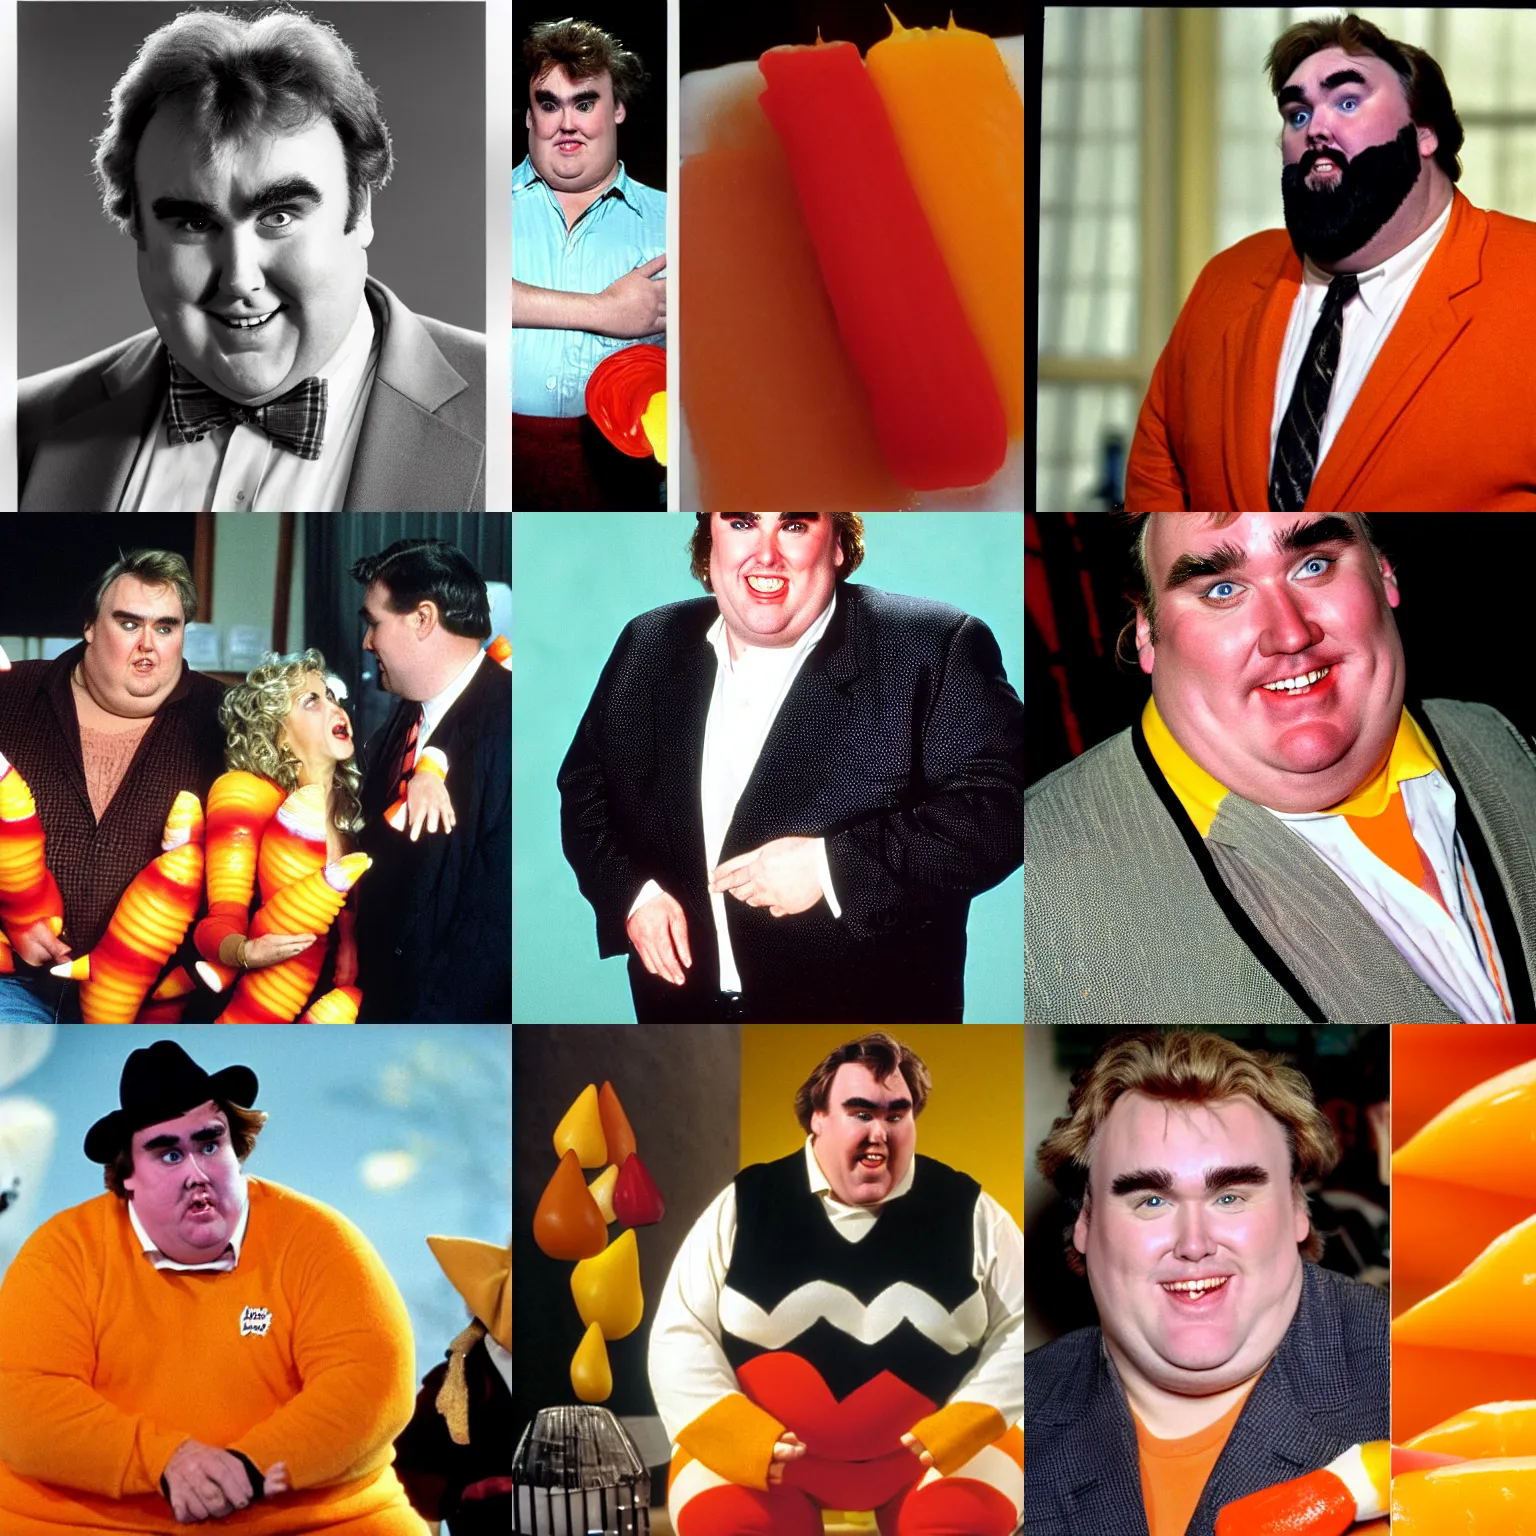 Prompt: john candy with skin like candy corn